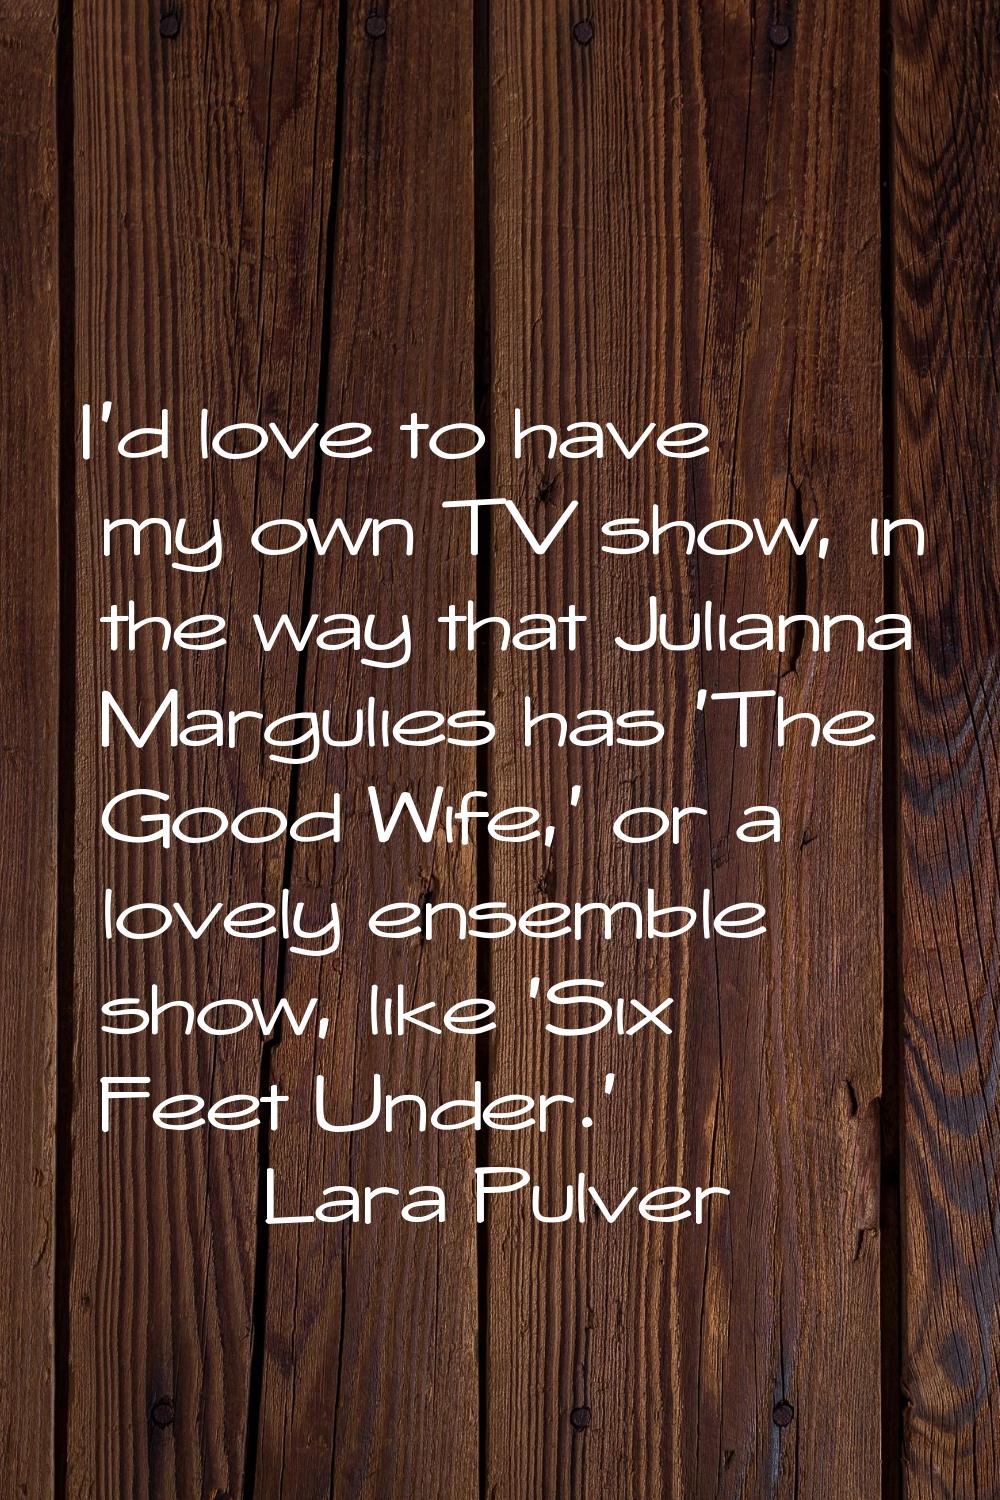 I'd love to have my own TV show, in the way that Julianna Margulies has 'The Good Wife,' or a lovel